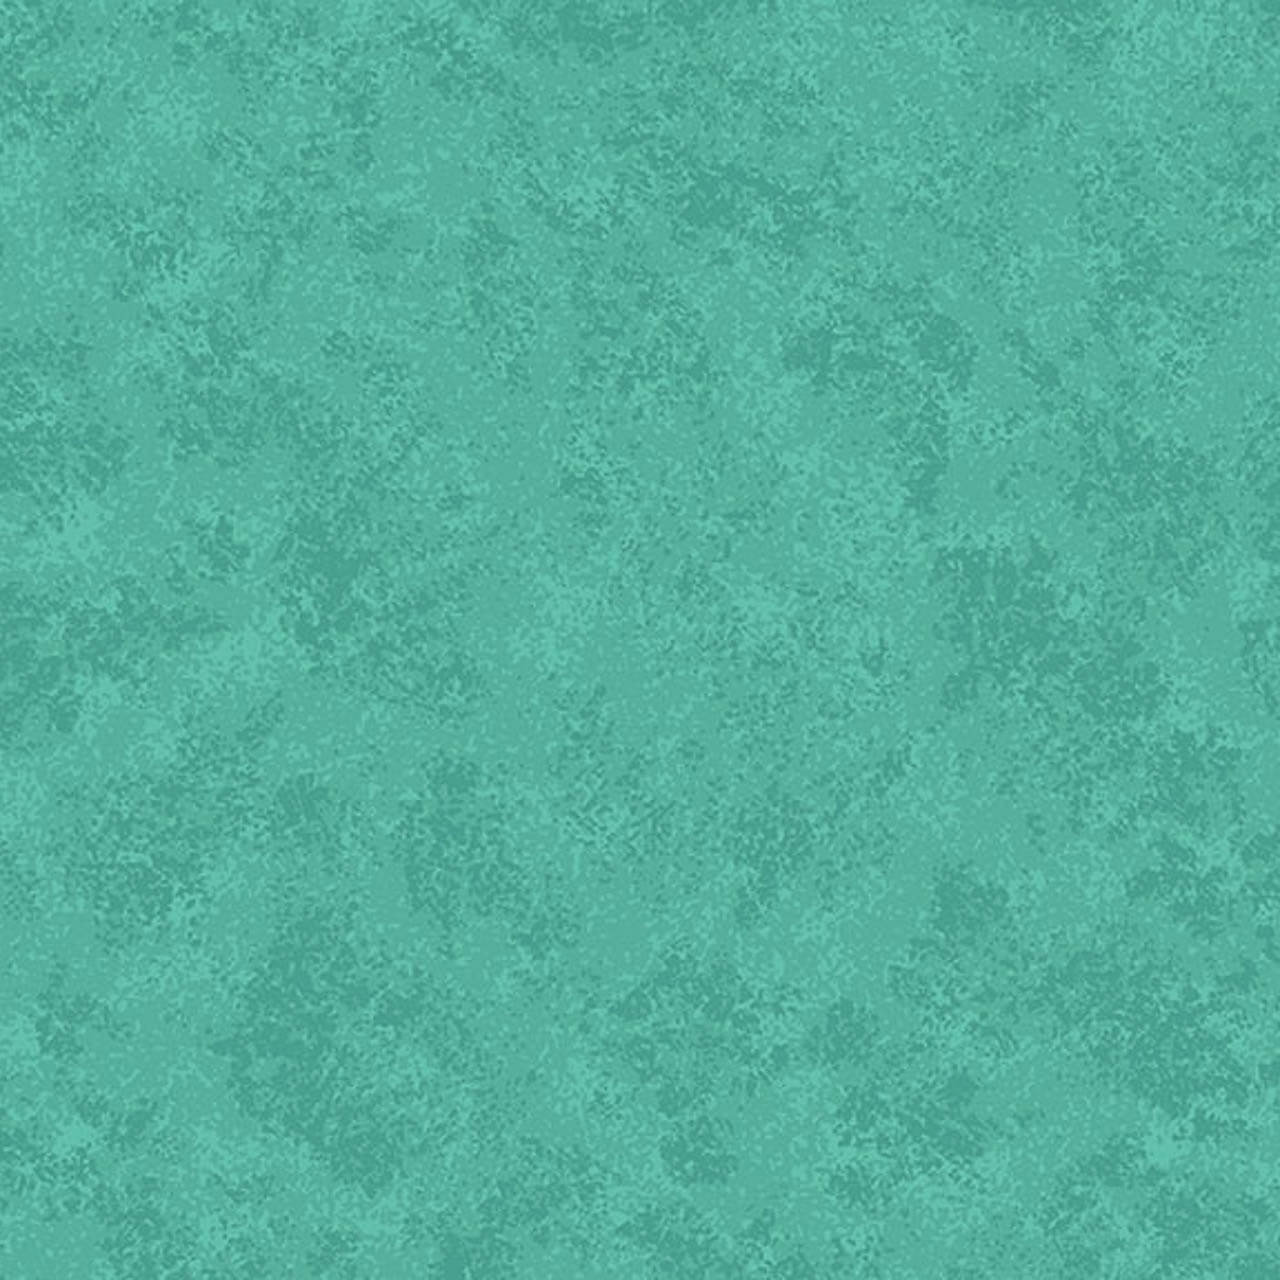 Lovely teal Lagoon fabric from Makower's Spraytime collection